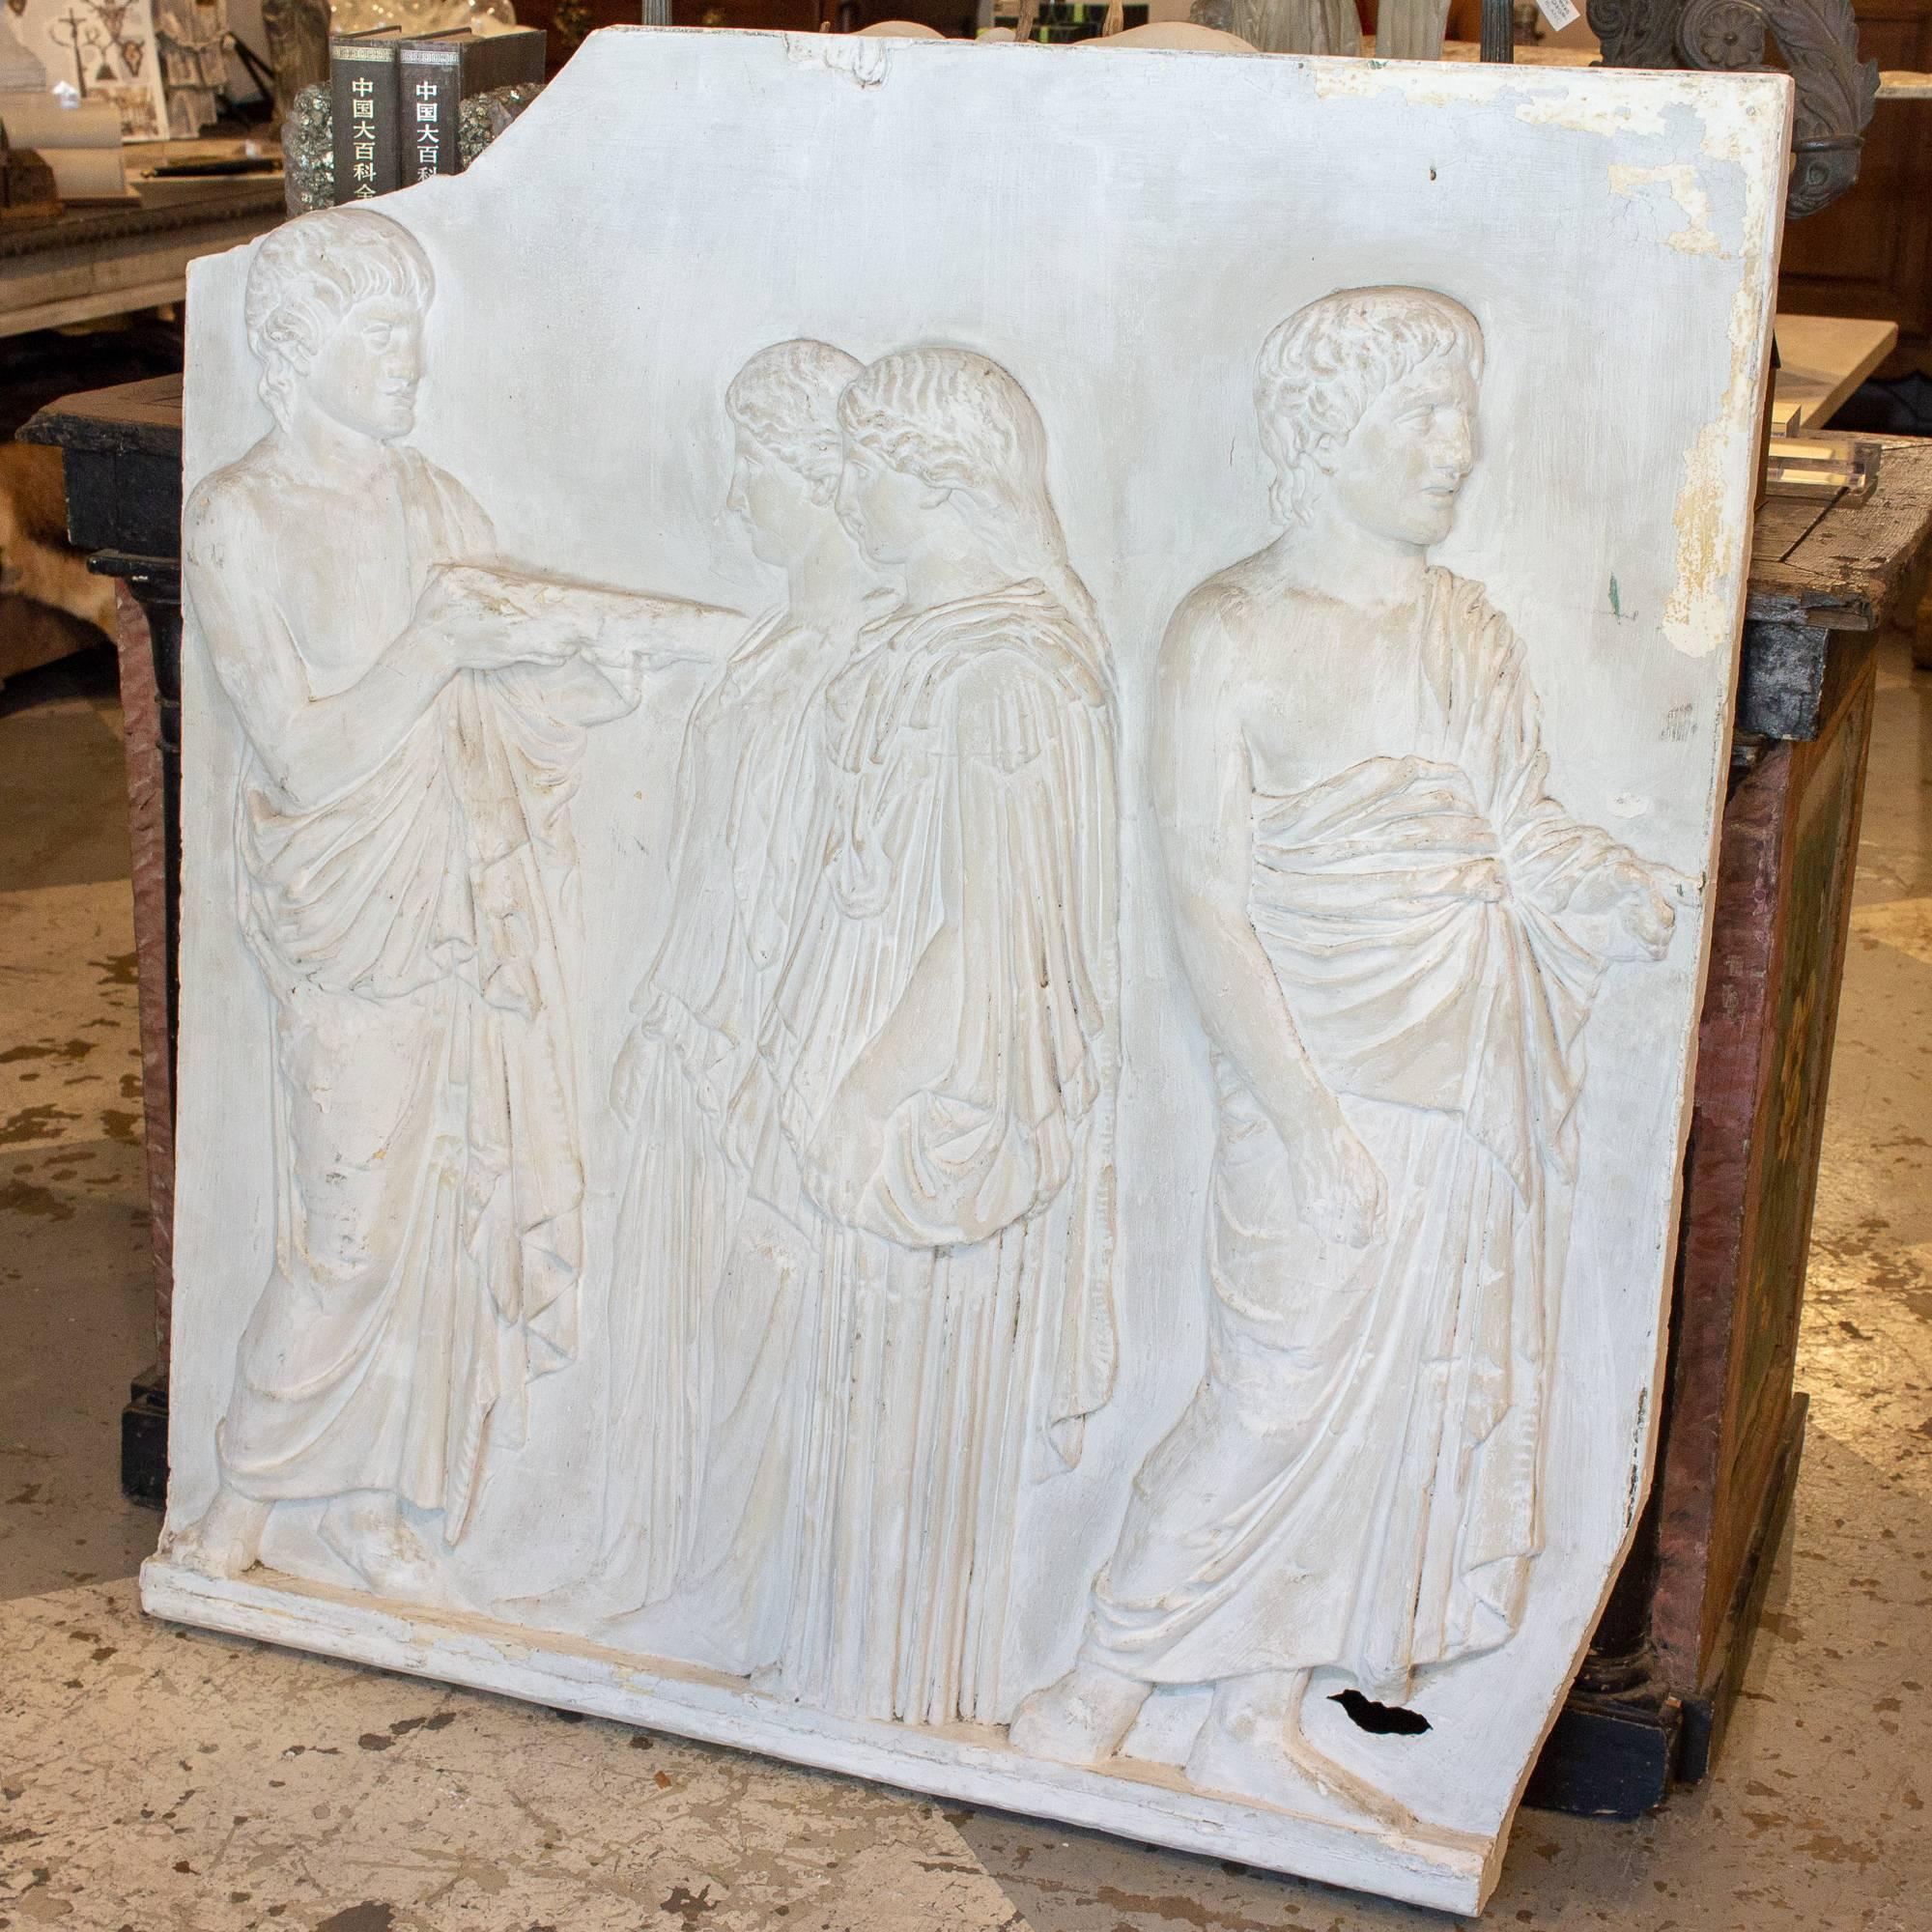 Uncovered in Belgium, this 1940s plaster wall plaque has a very Classical Greek subject matter, showing four figures in flowing robes, two of which appear to be men and two women. This piece would look beautiful mounted on a wall or simply leaning